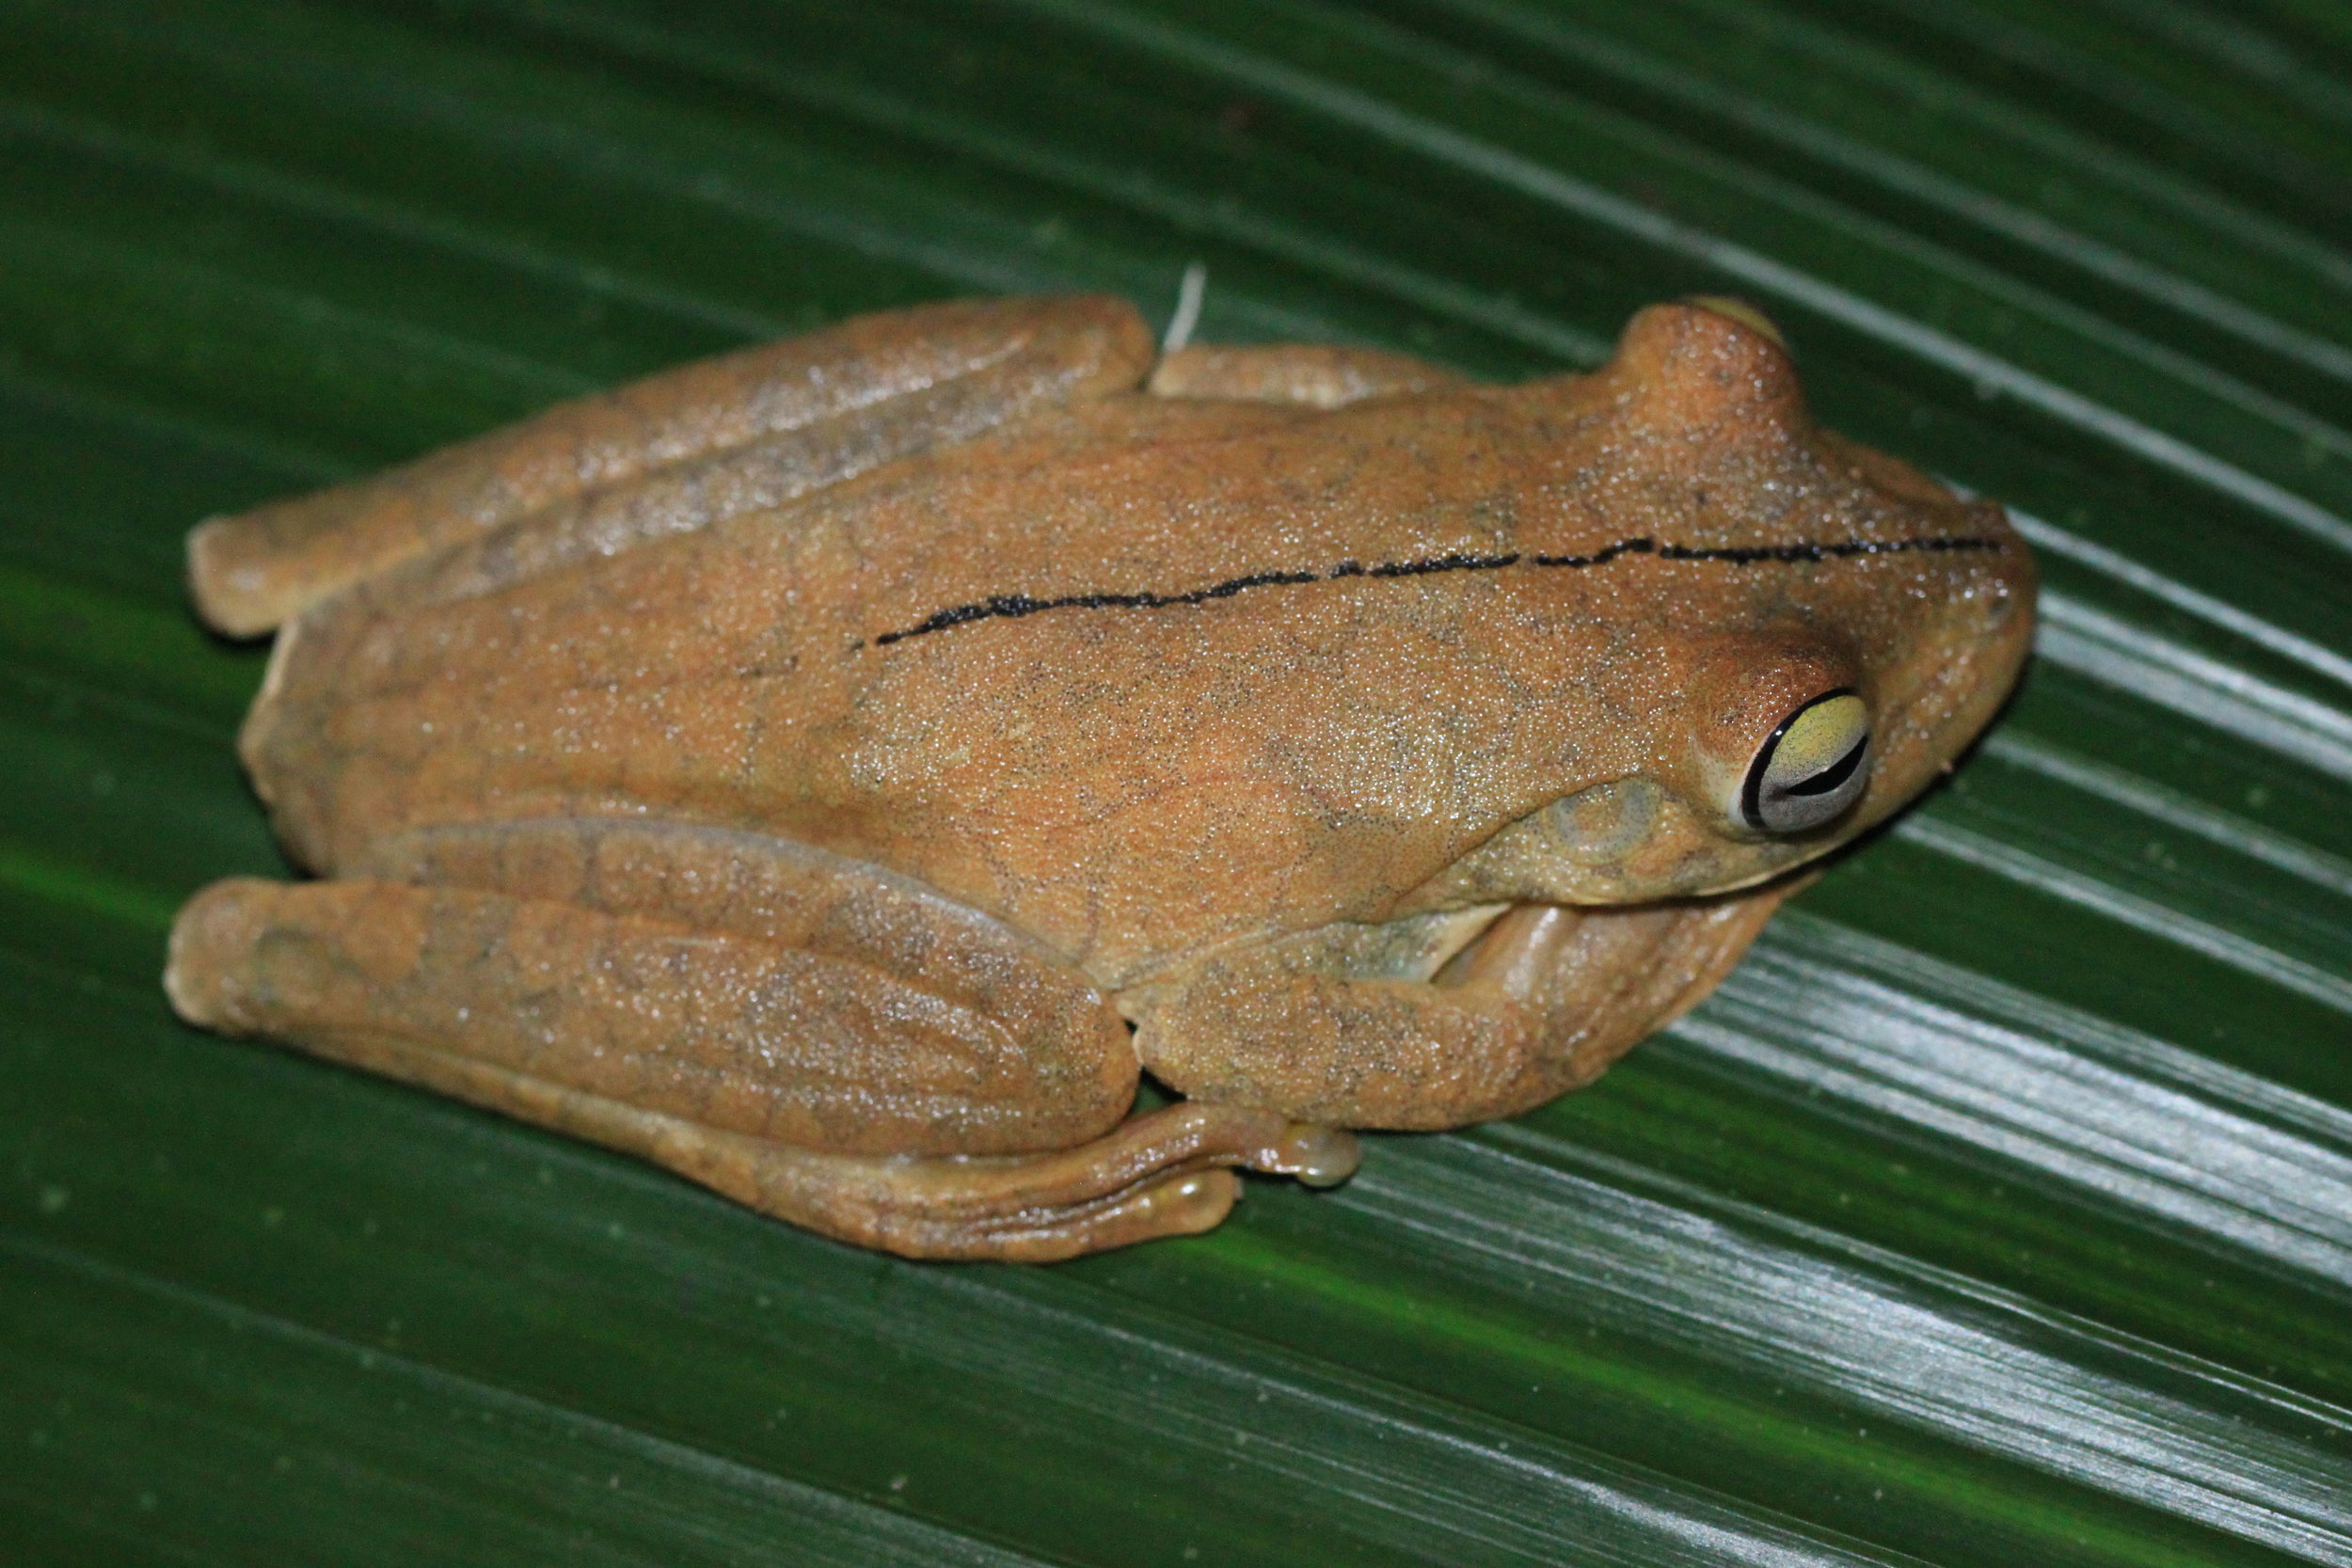 How to visit frogs in Costa Rica